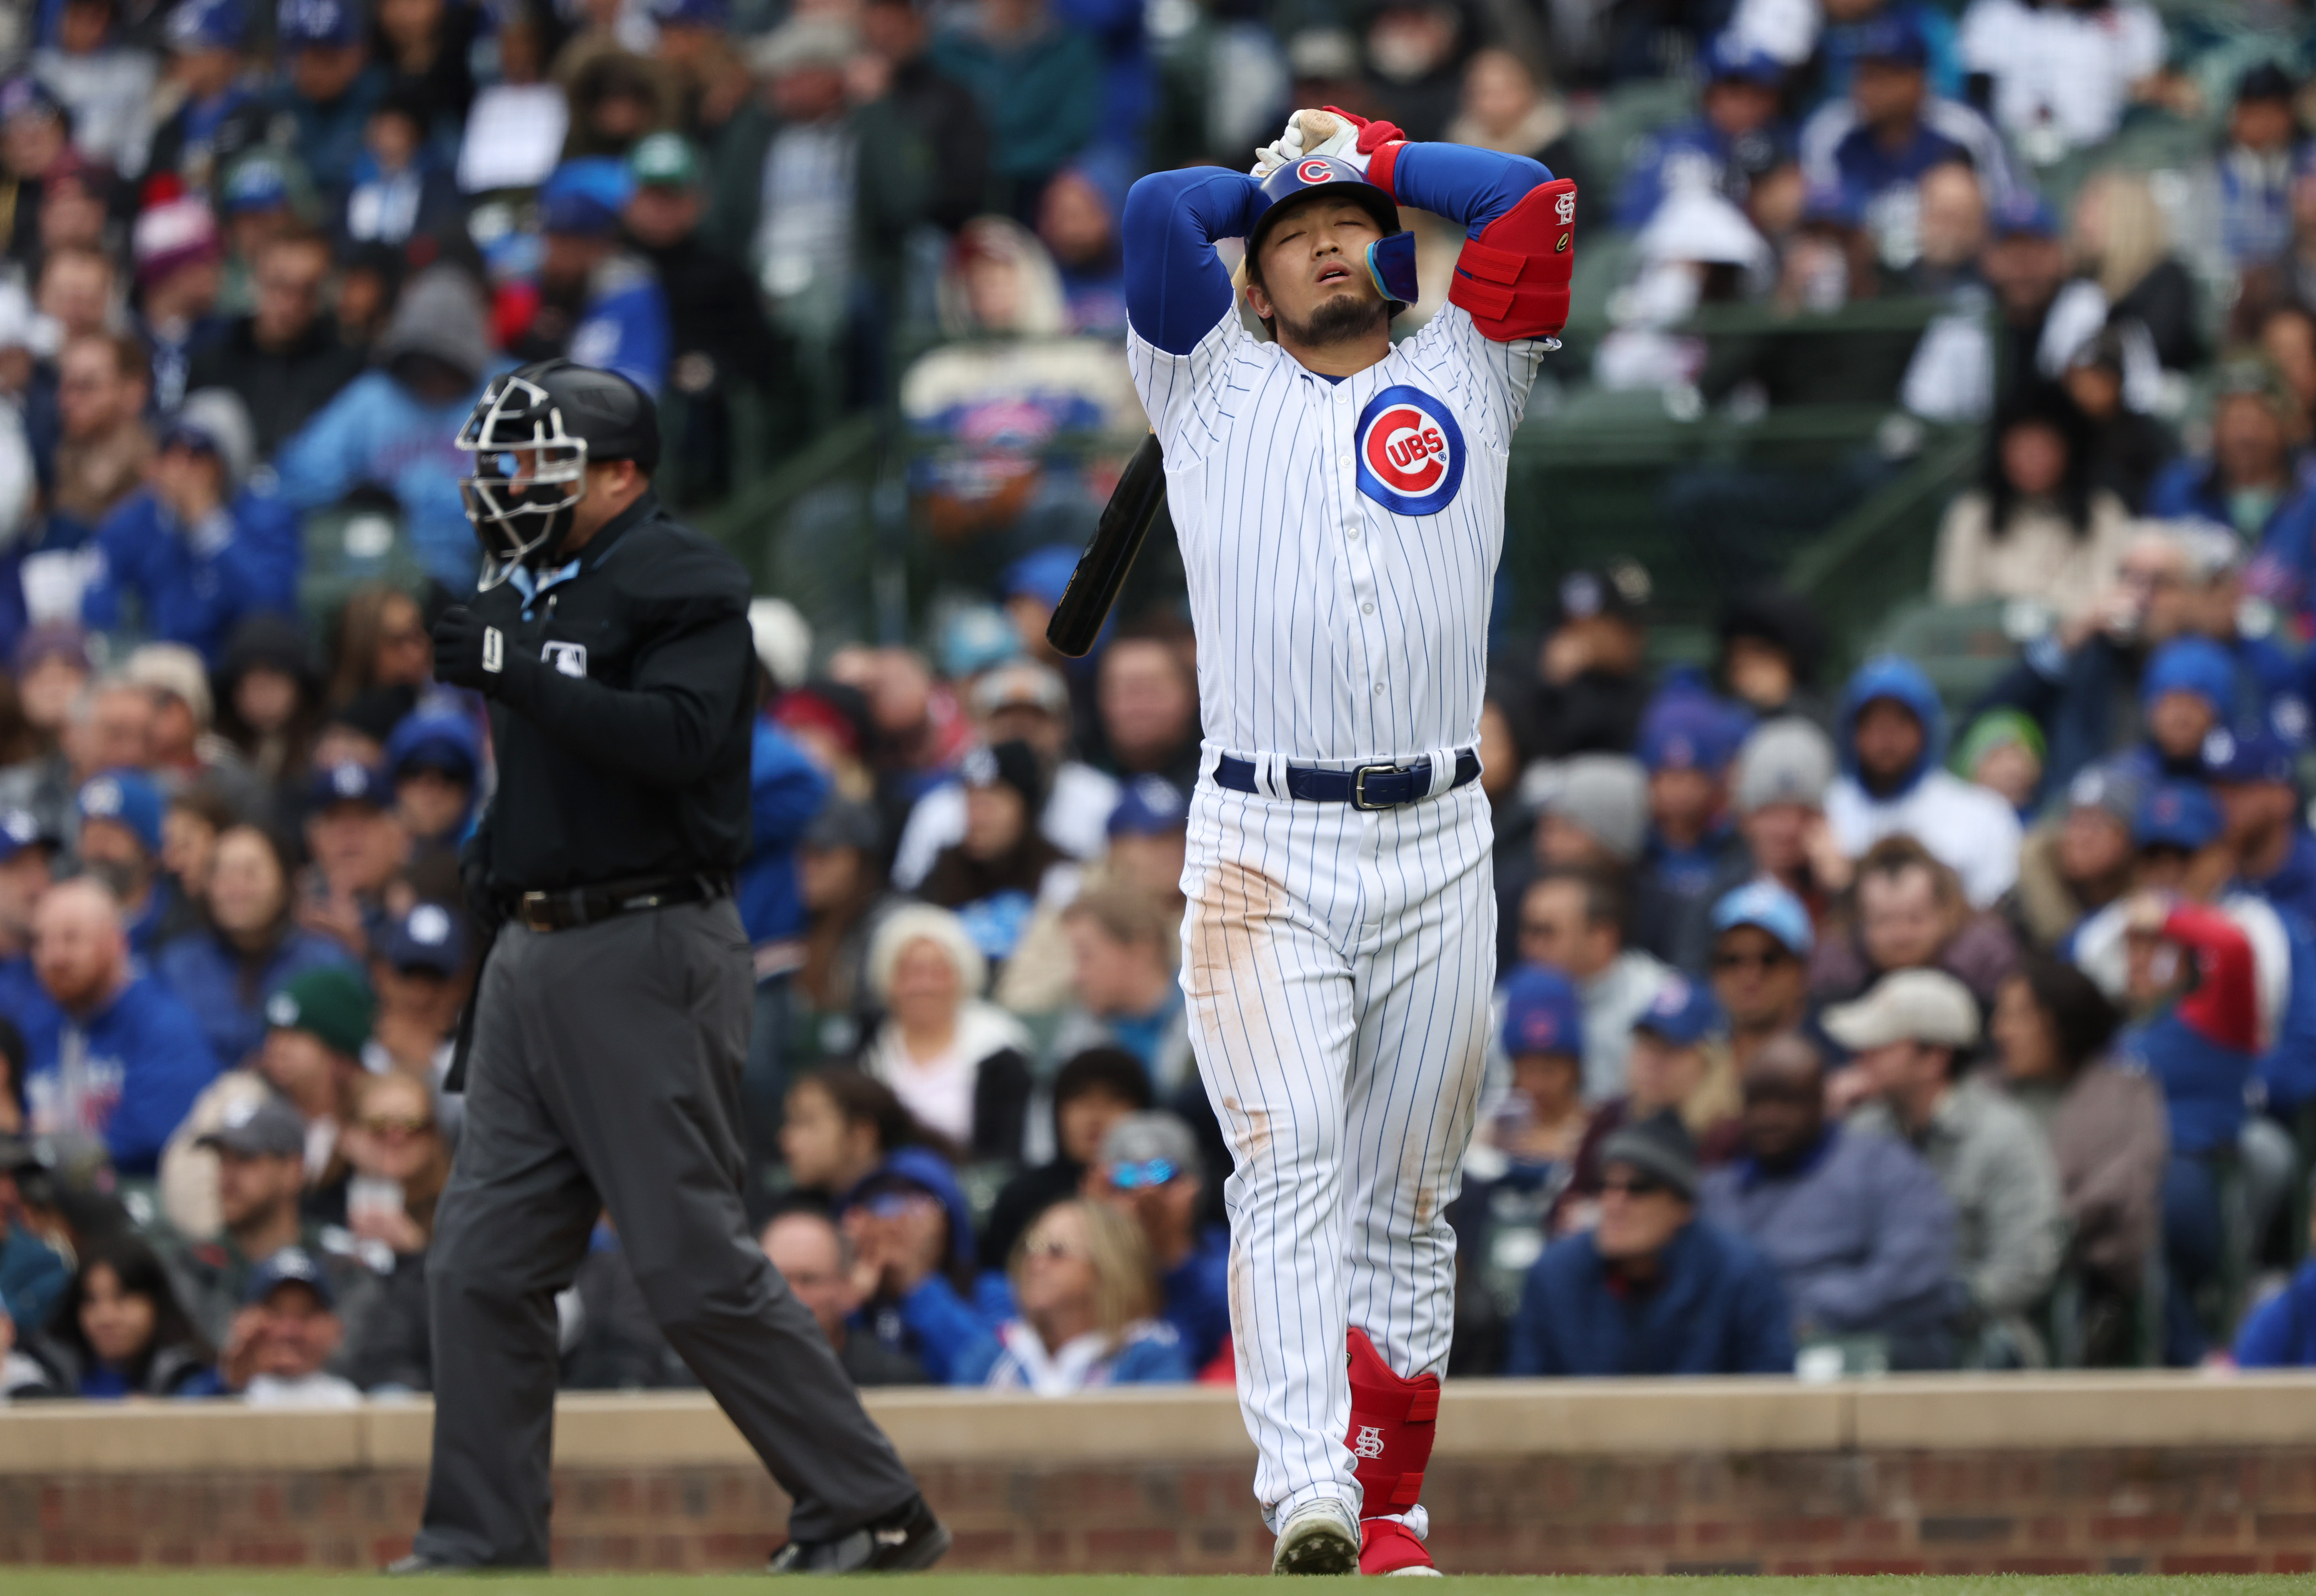 The Cubs Top List You've Been Waiting For: Your 9 Hottest Cubs